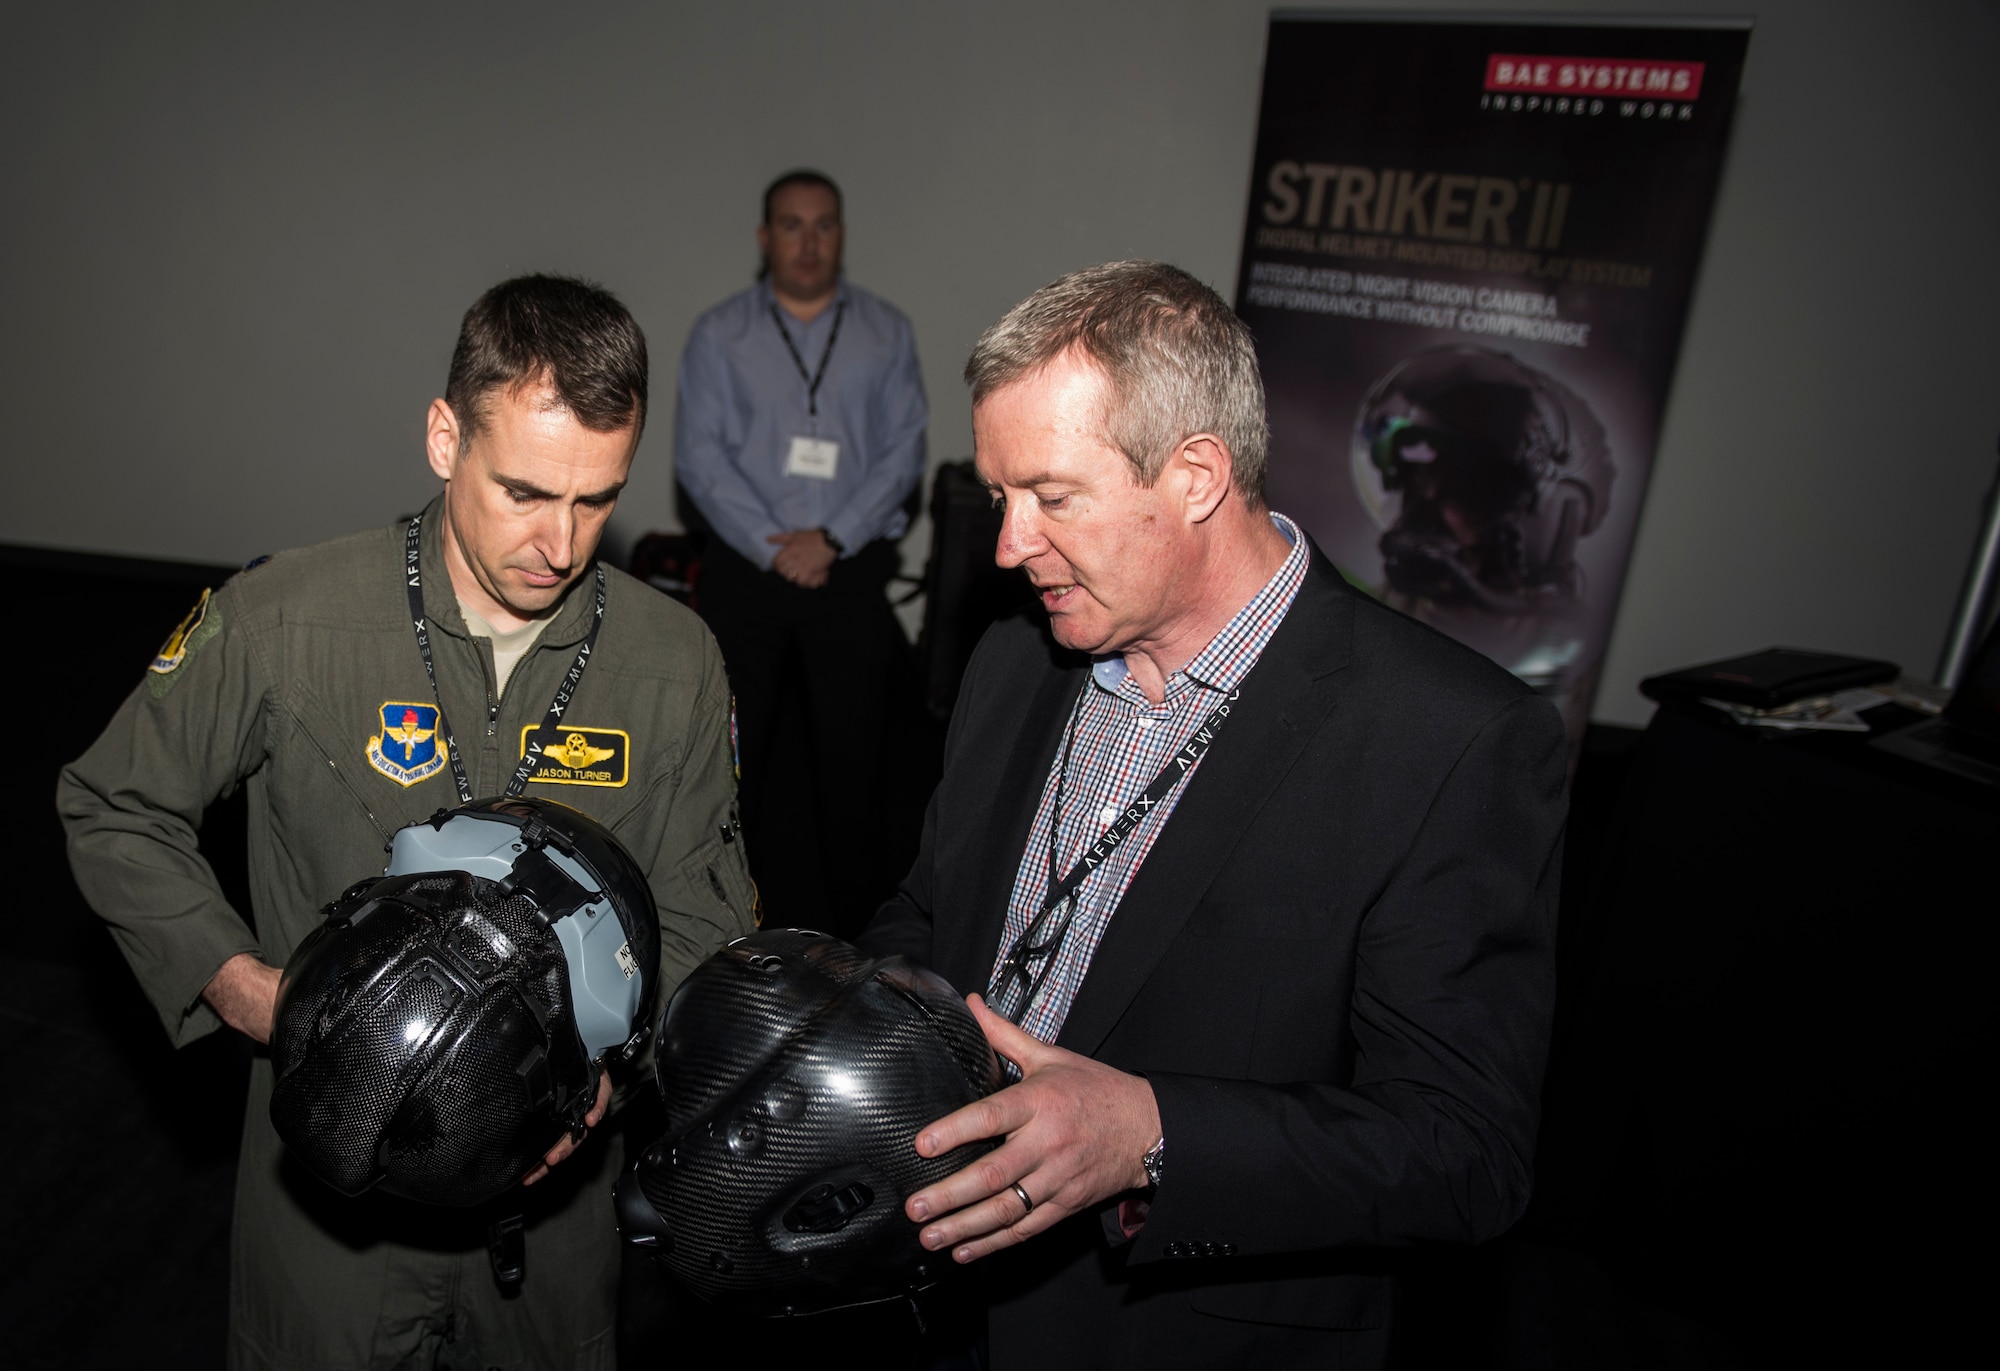 An Airman and an attendee of the AFWERX Helmet Challenge discuss new helmets at the Enclave Las Vegas, Nev., November 14, 2018. The final goal of the challenge is to enhance aircrew performance, aircrew safety and aircrew satisfaction. (U.S. Air Force photo by Airman 1st Class Bryan T. Guthrie)